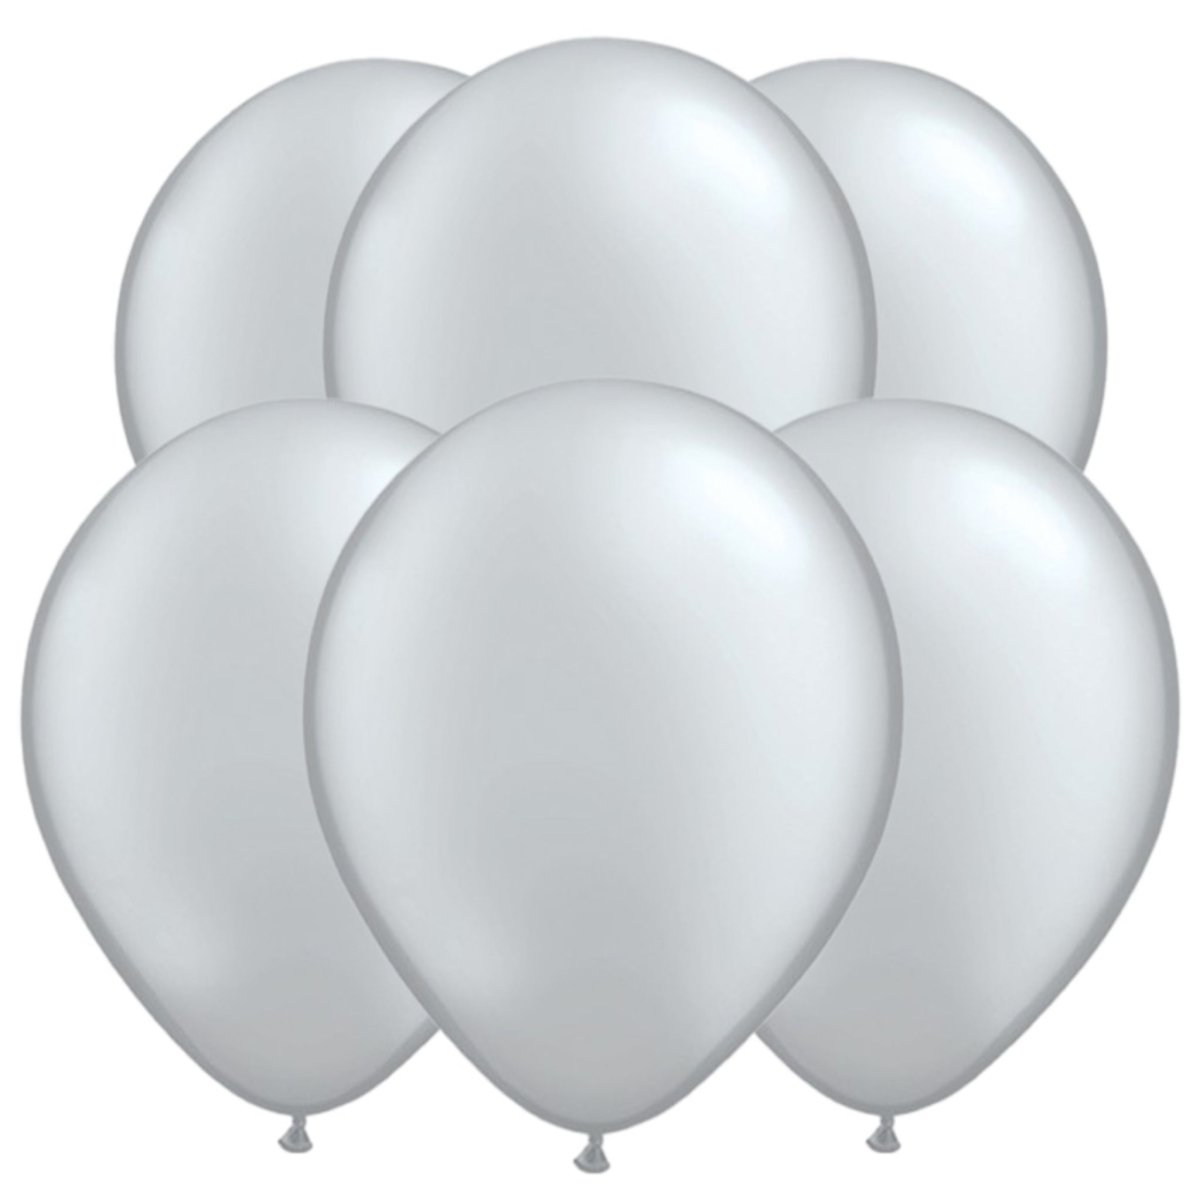 Metallic Silver Balloons 28cm/11" - 10 Pack - Kids Party Craft